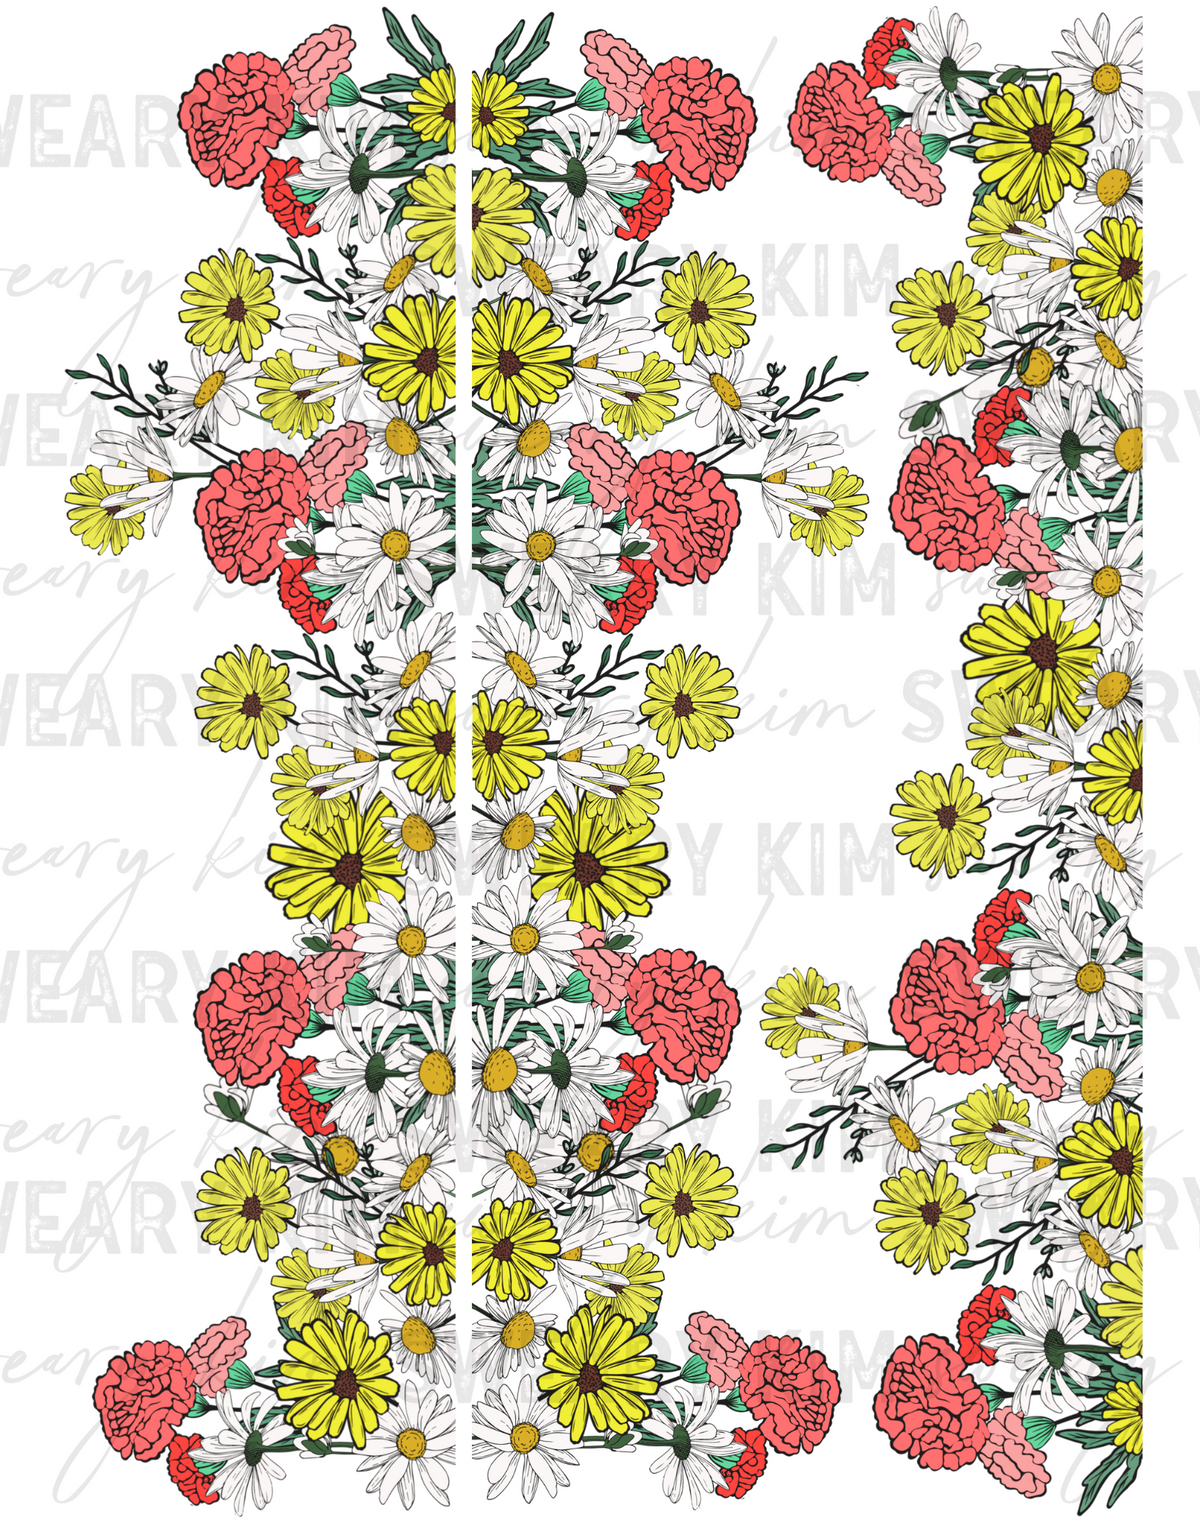 White & Yellow Daisy Floral Borders UV Dtf Element Sheet